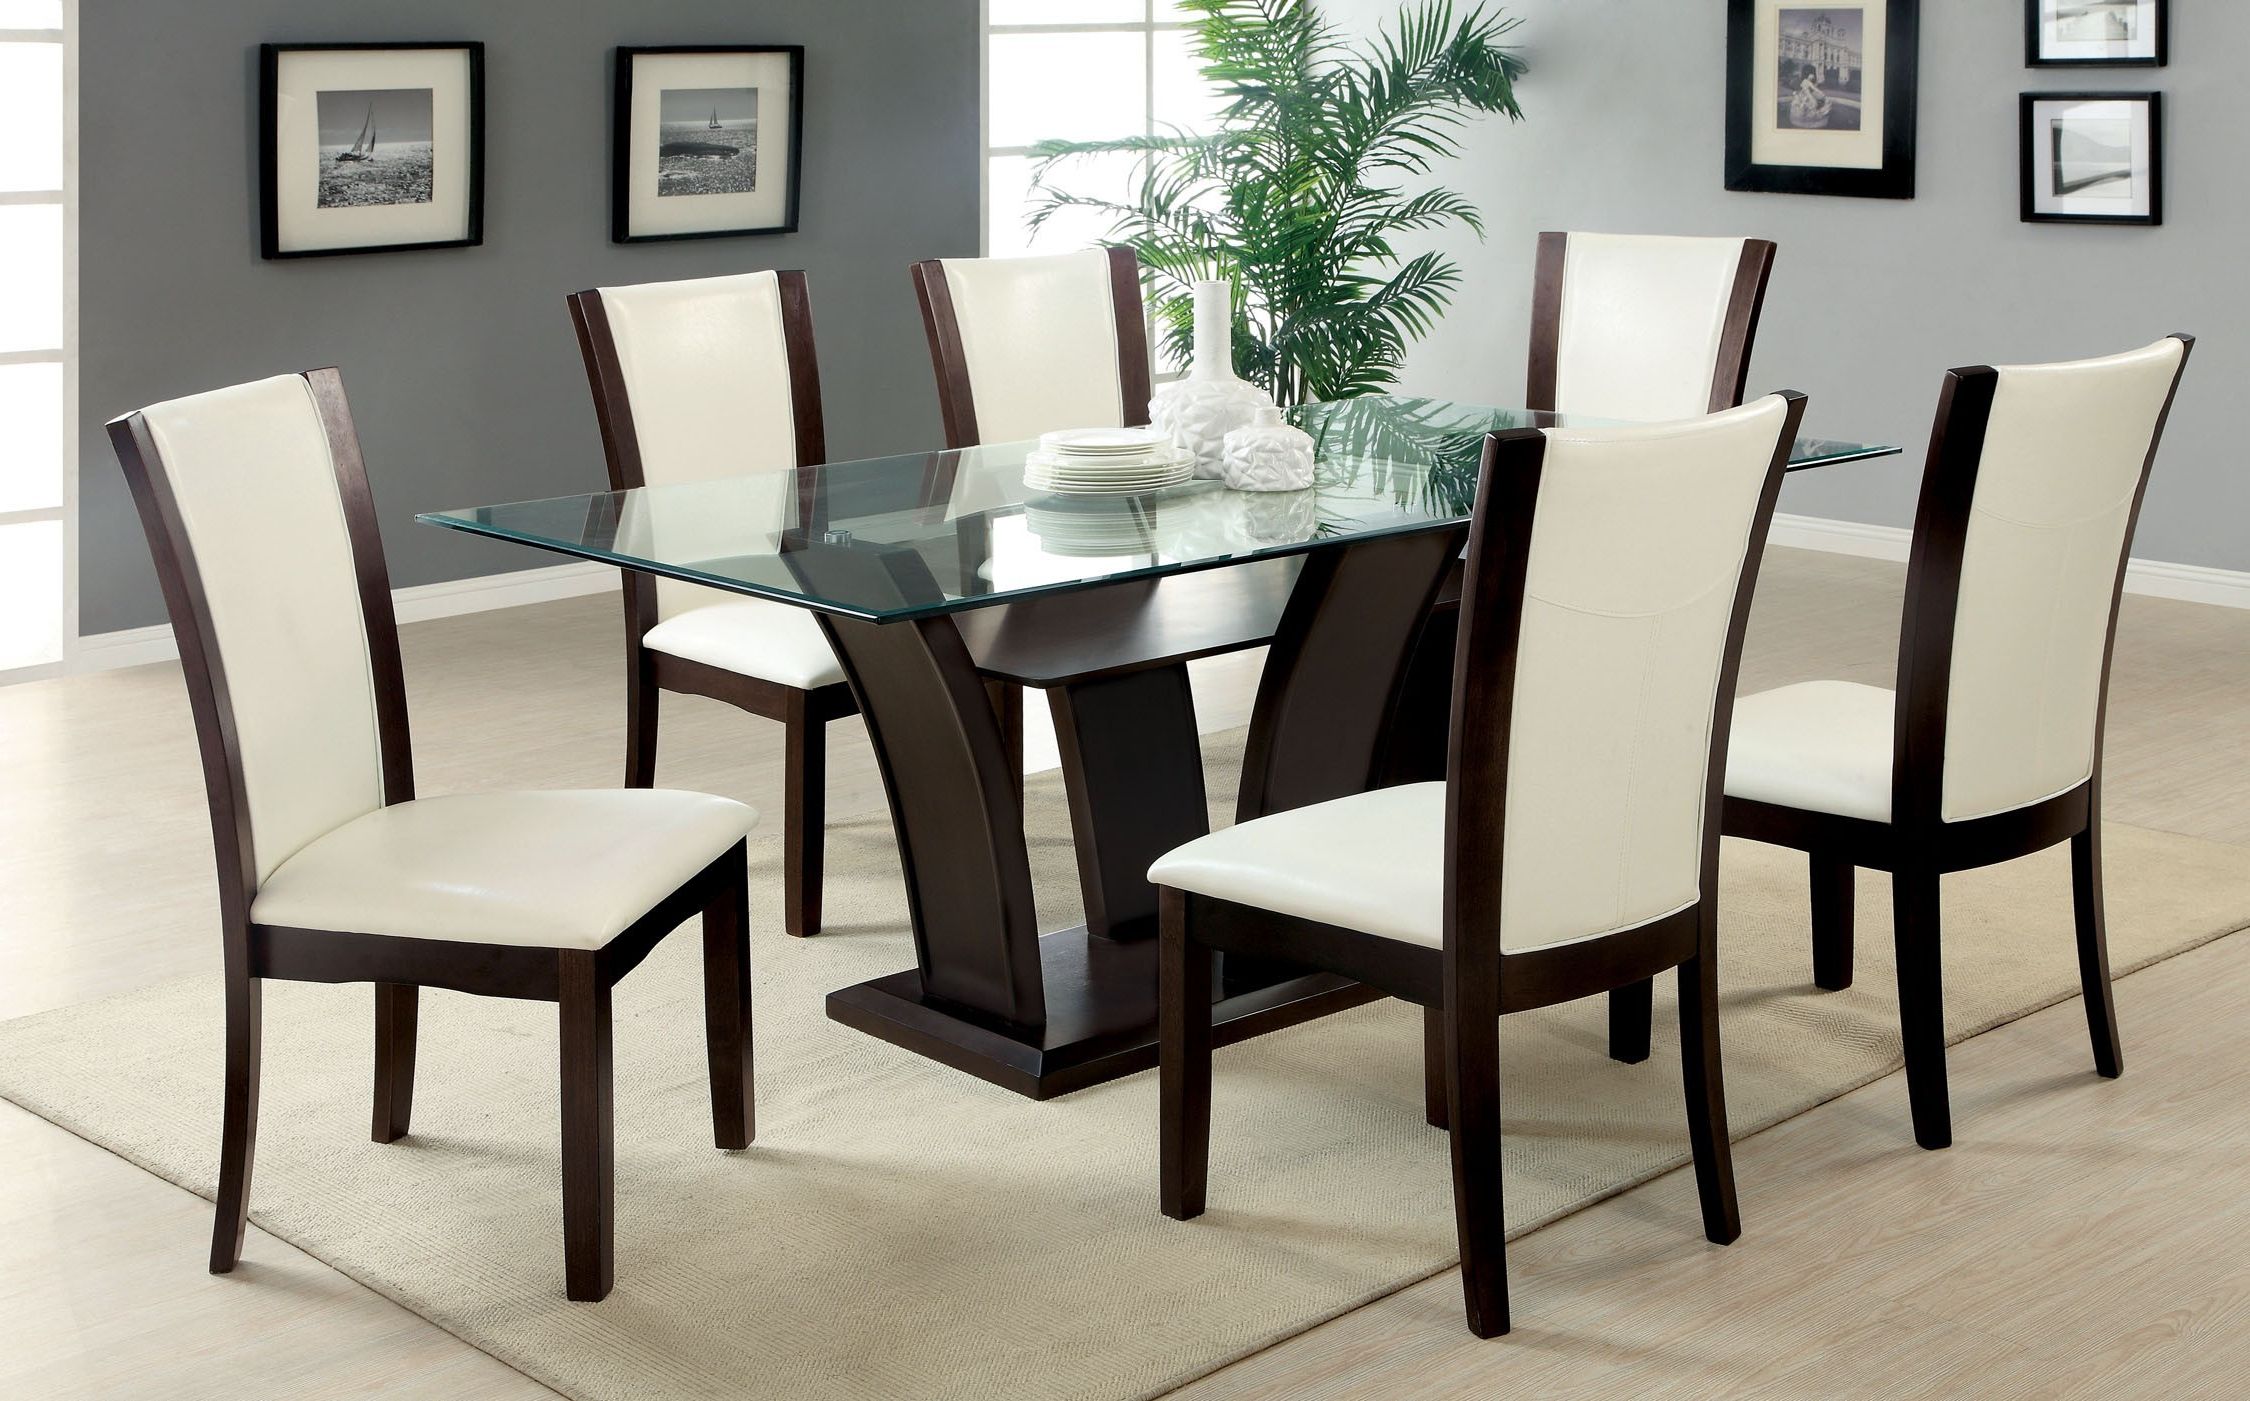 Widely Used Stylish 6 Seat Dining Room Table – Father Of Trust Designs Pertaining To Contemporary 6 Seating Rectangular Dining Tables (Photo 7 of 25)